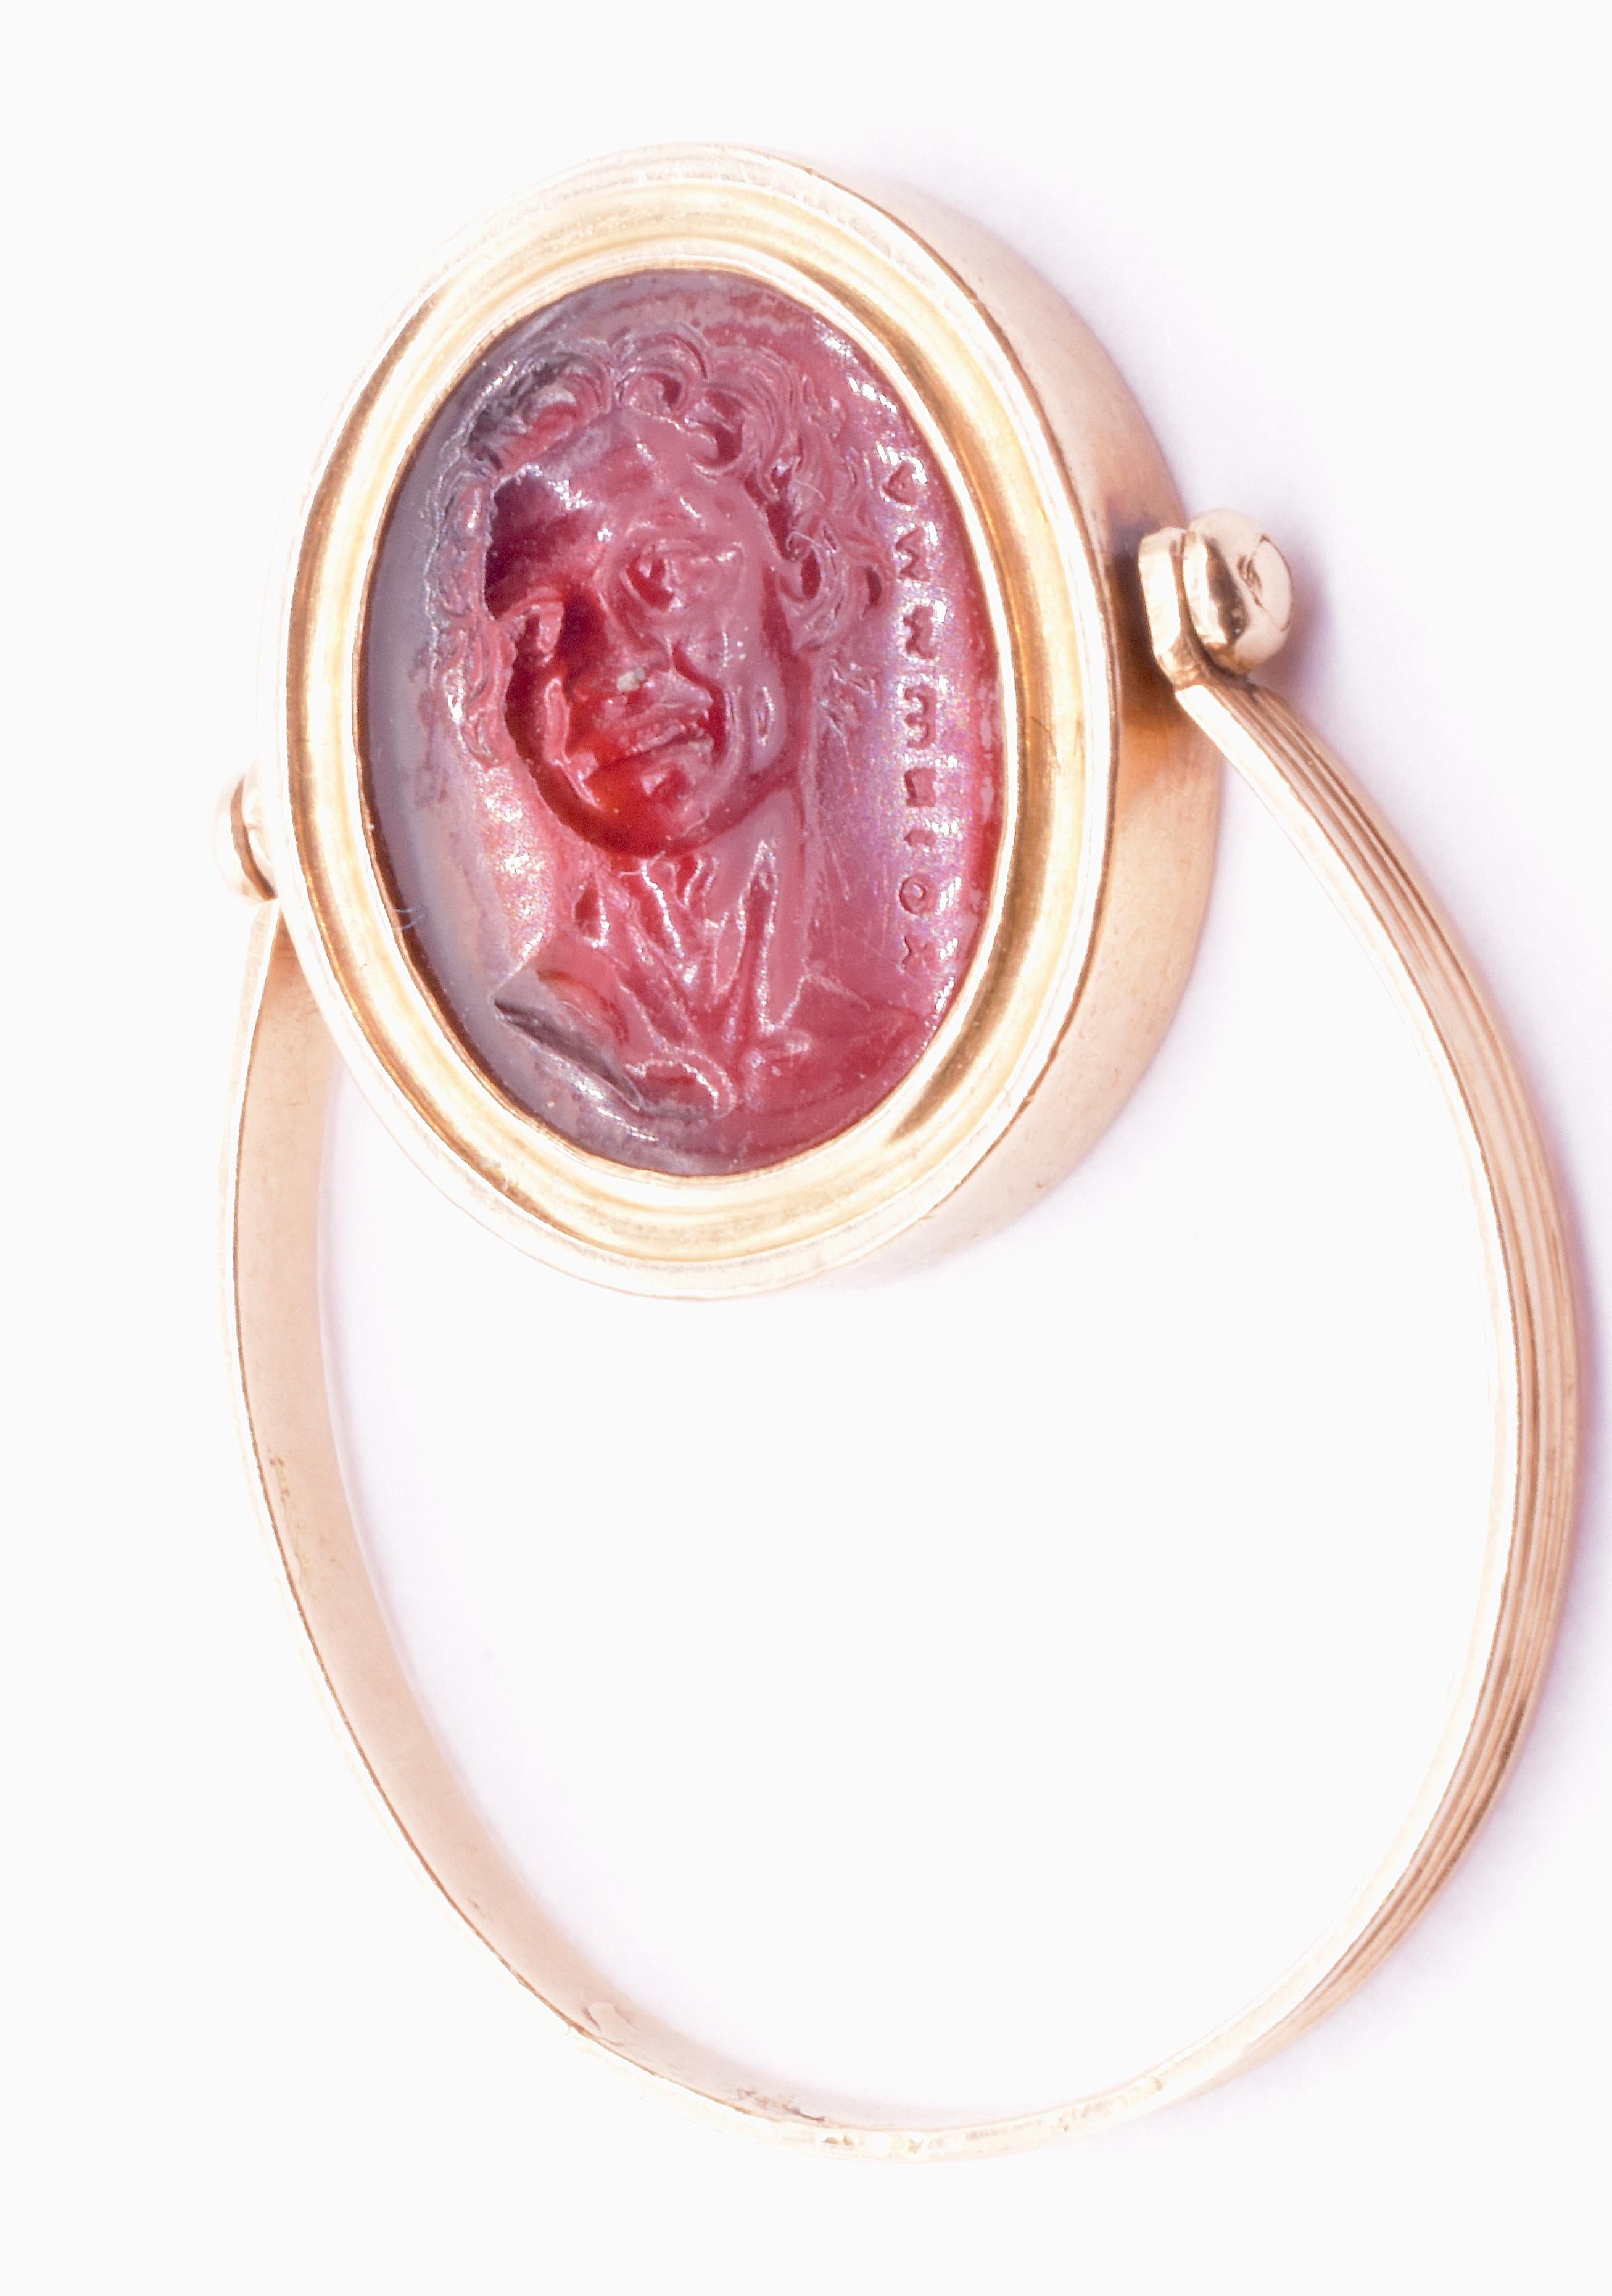 C1790 Glass and Carnelian Tassie Intaglio Ring of Laughing Satyr   3